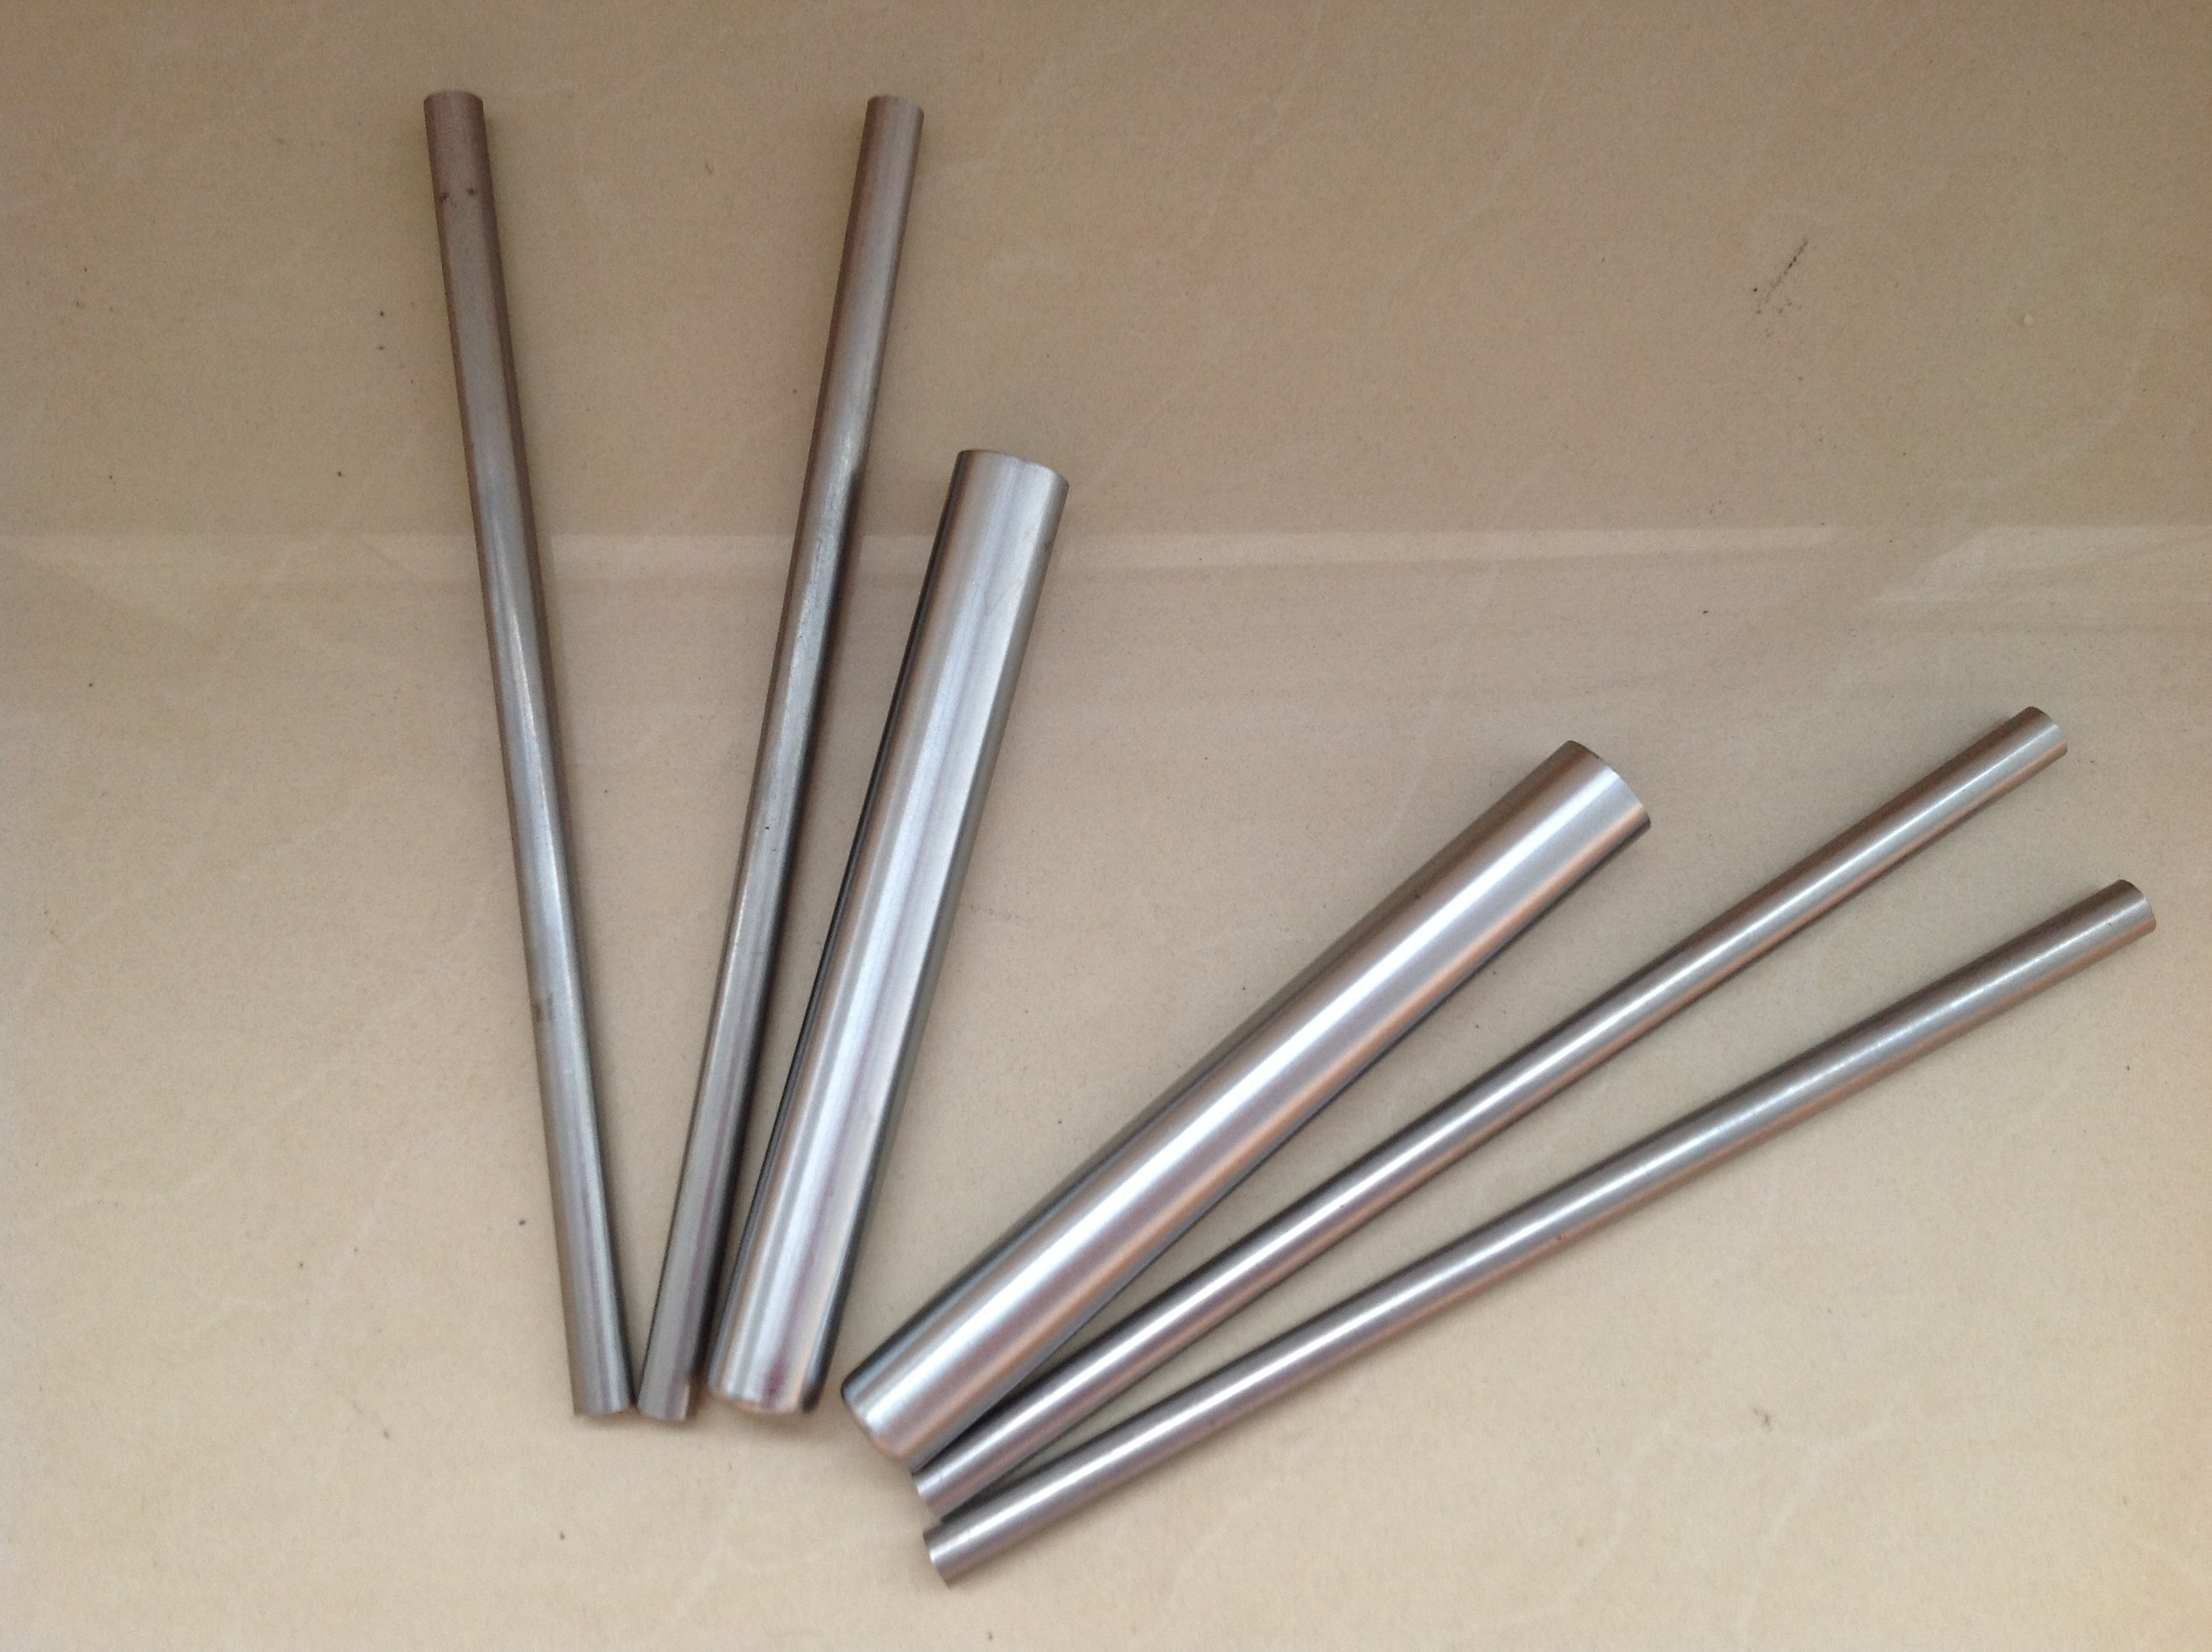 ASTM A107 Alloy Semless Steel Tube And Pipe Cold drawn for hydraulic system